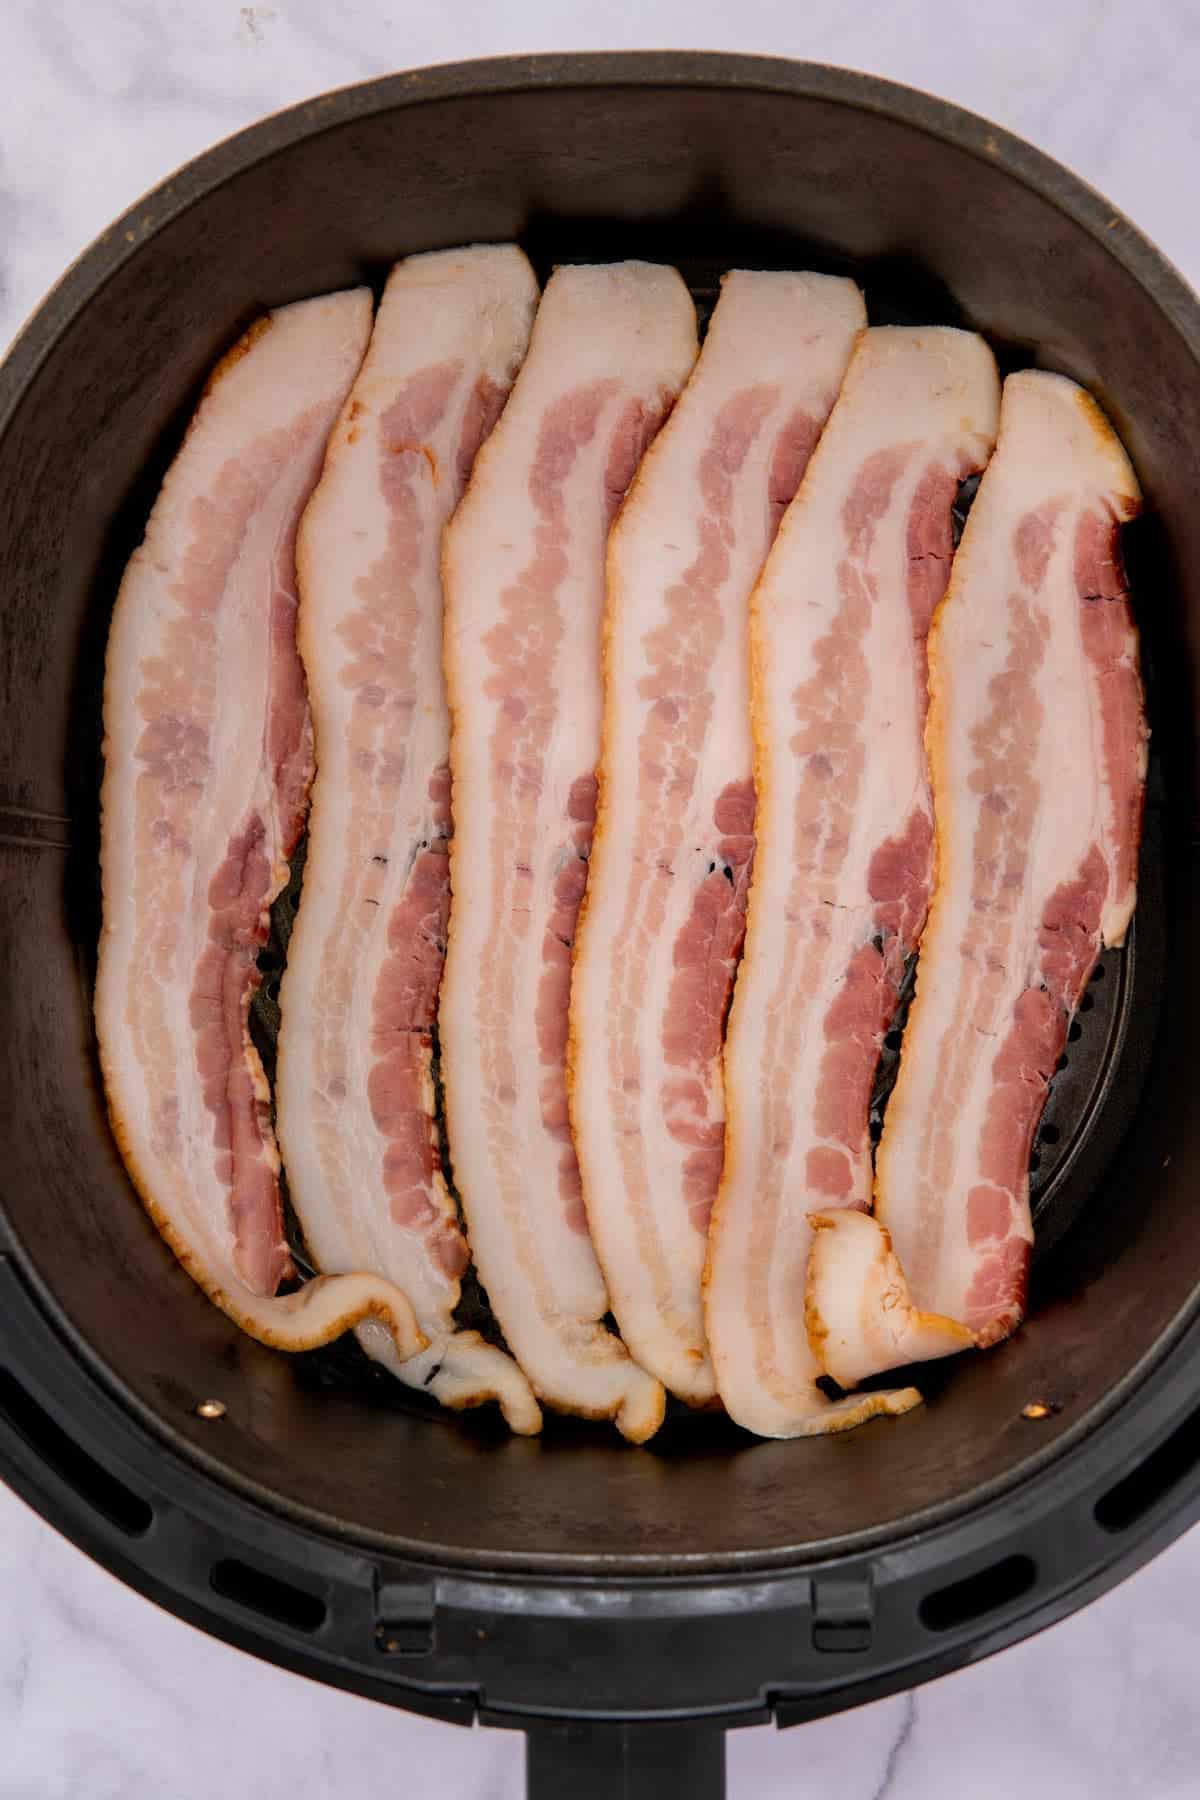 Uncooked strips of bacon in an air fryer basket.